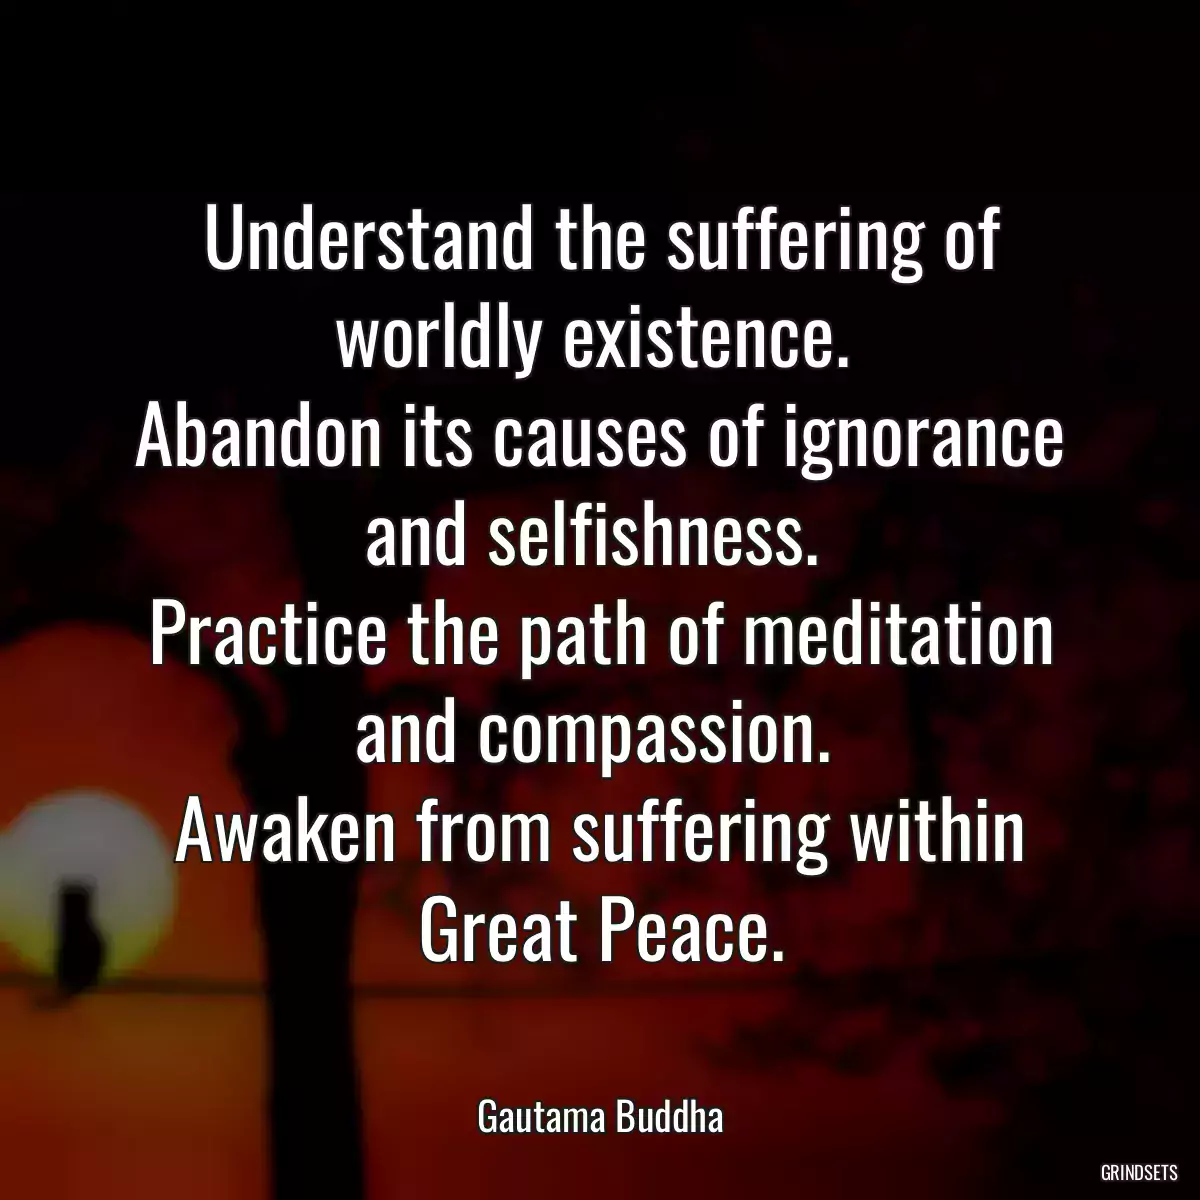 Understand the suffering of worldly existence. 
Abandon its causes of ignorance and selfishness. 
Practice the path of meditation and compassion. 
Awaken from suffering within Great Peace.